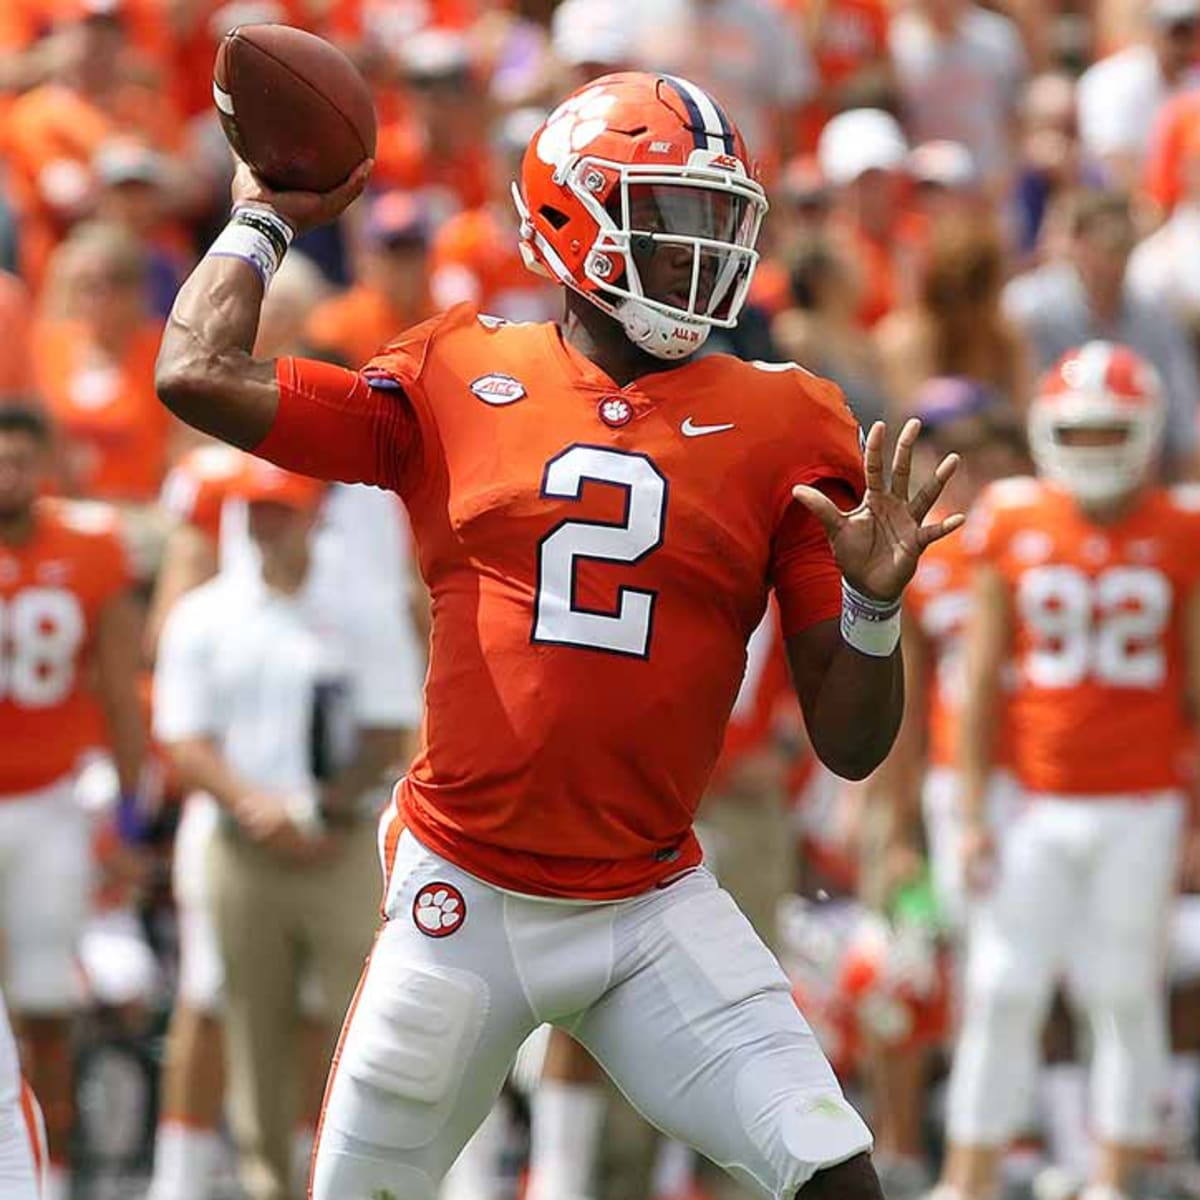 Former Clemson QB Kelly Bryant announces intention to transfer to